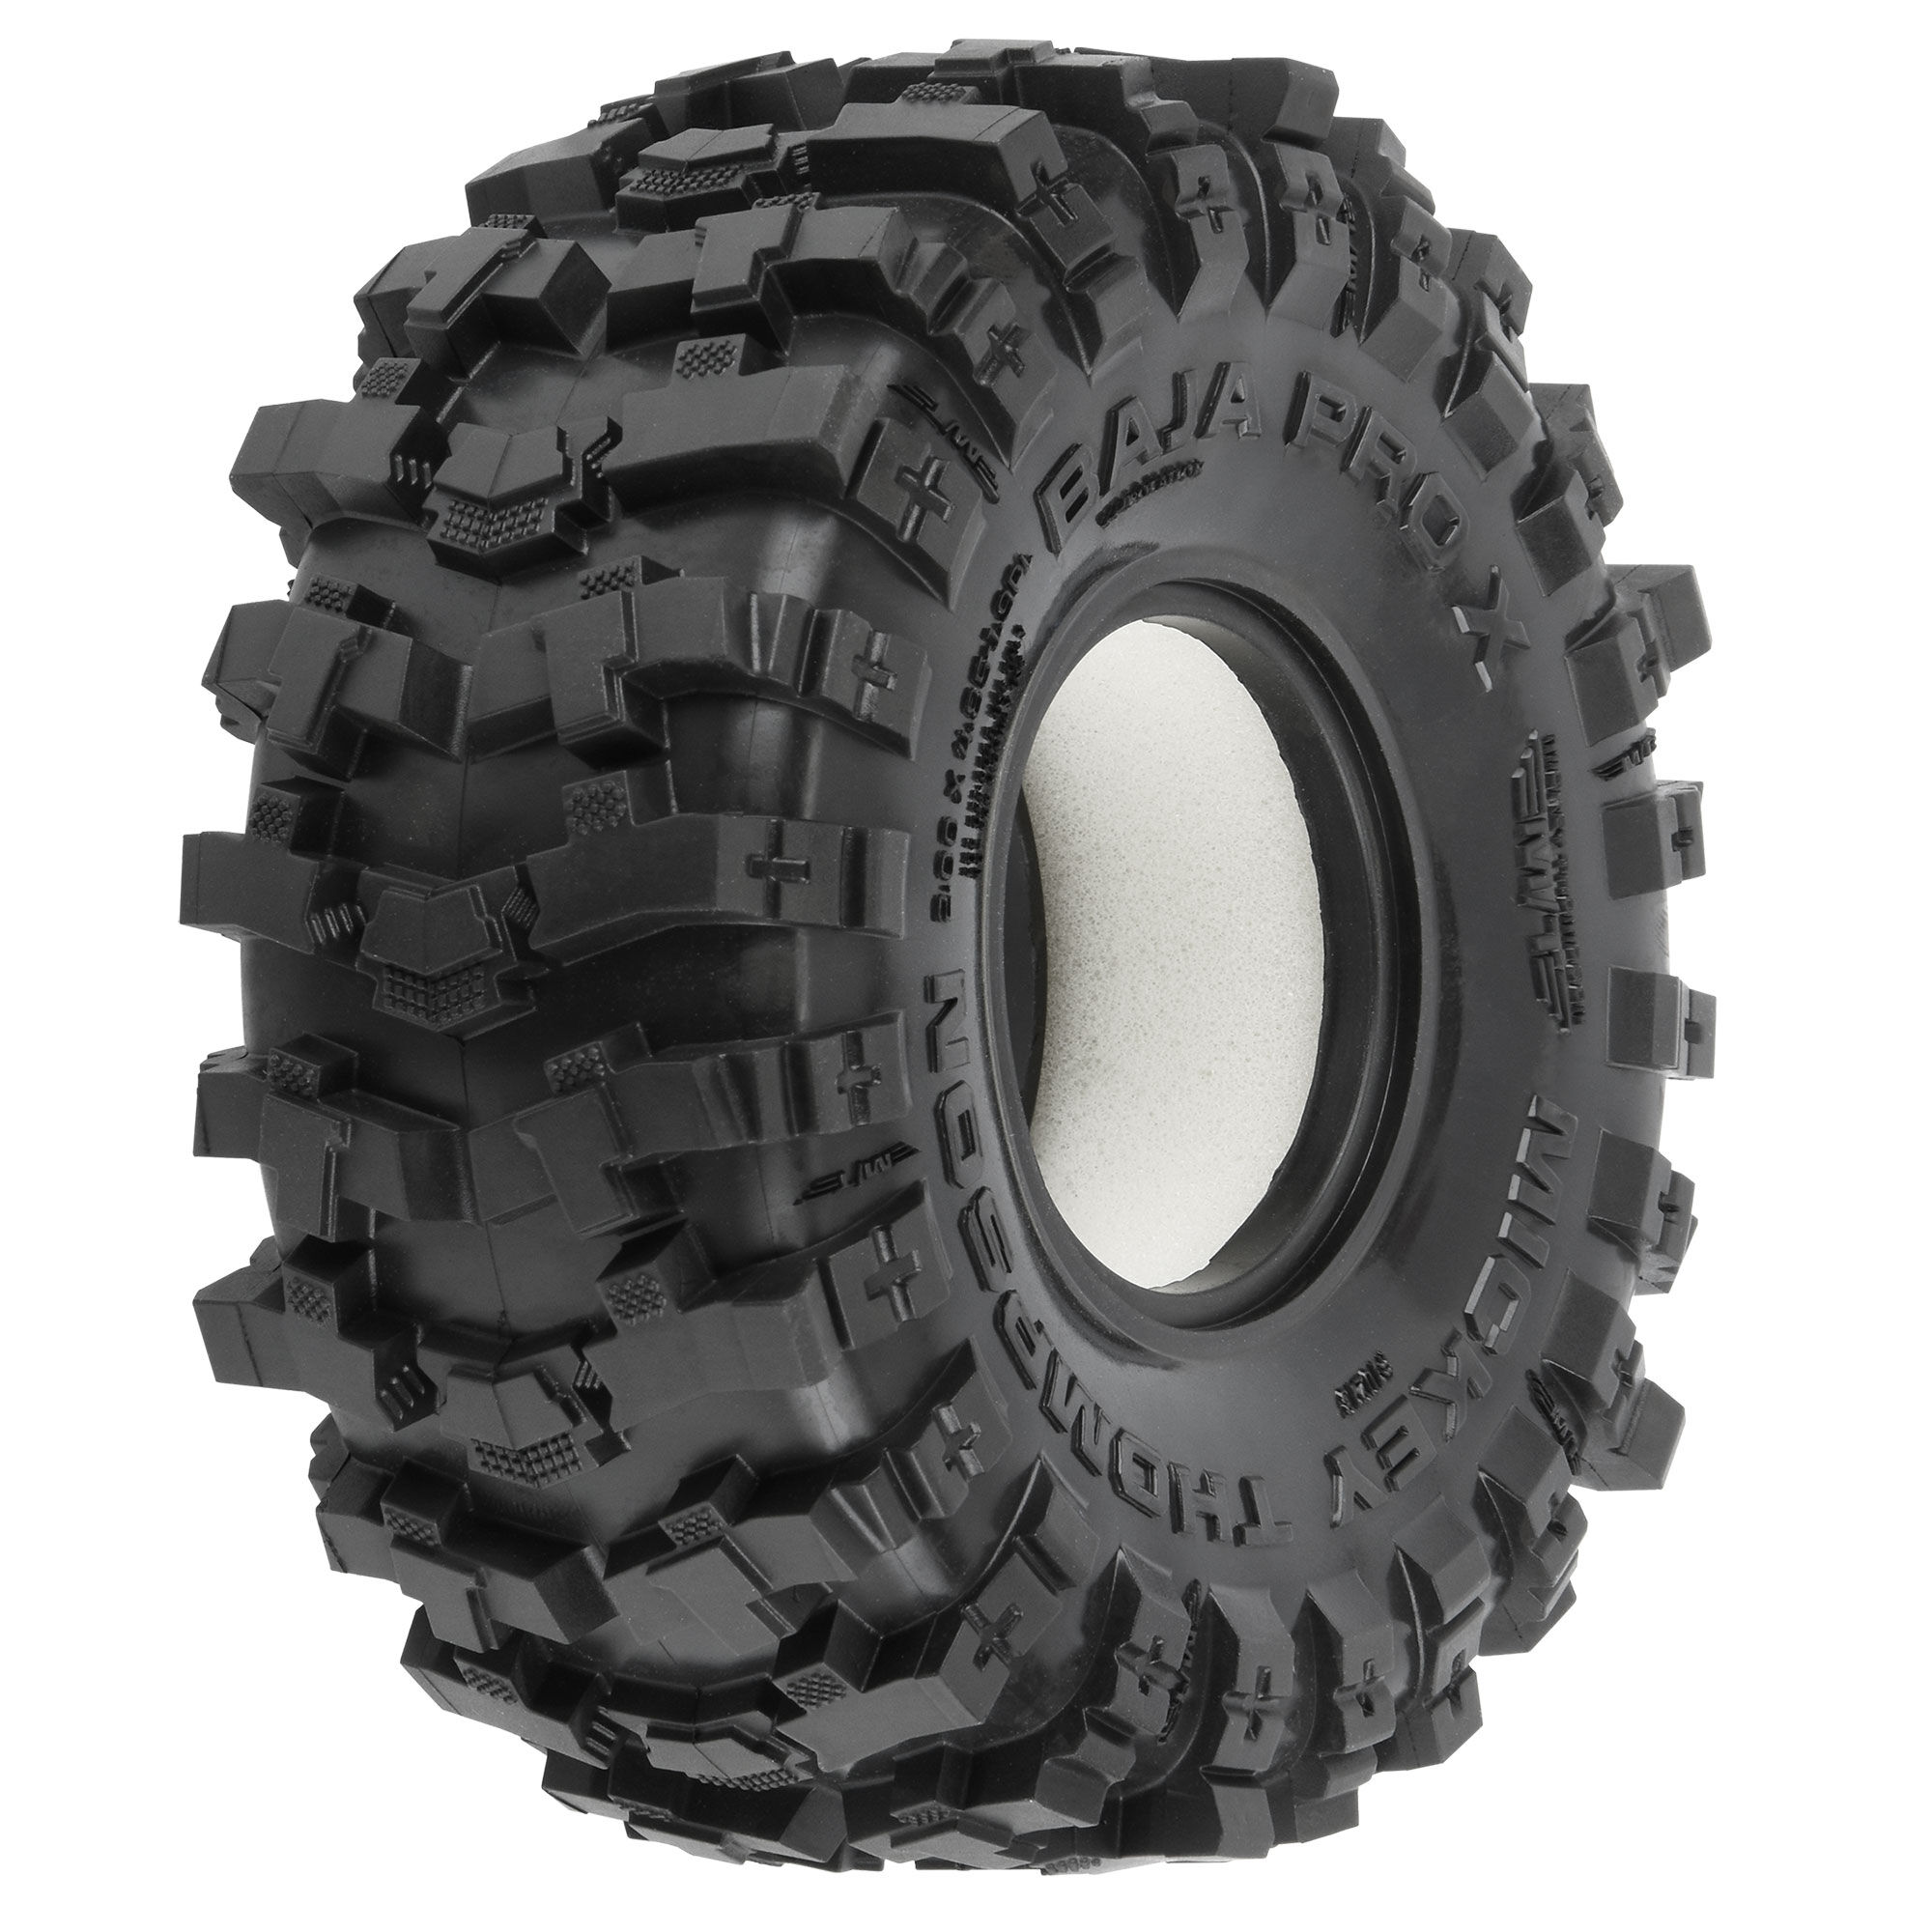 Pro-line Racing Hole Shot 3.0 2.2 2WD M4 Buggy Front Tires PRO829003 